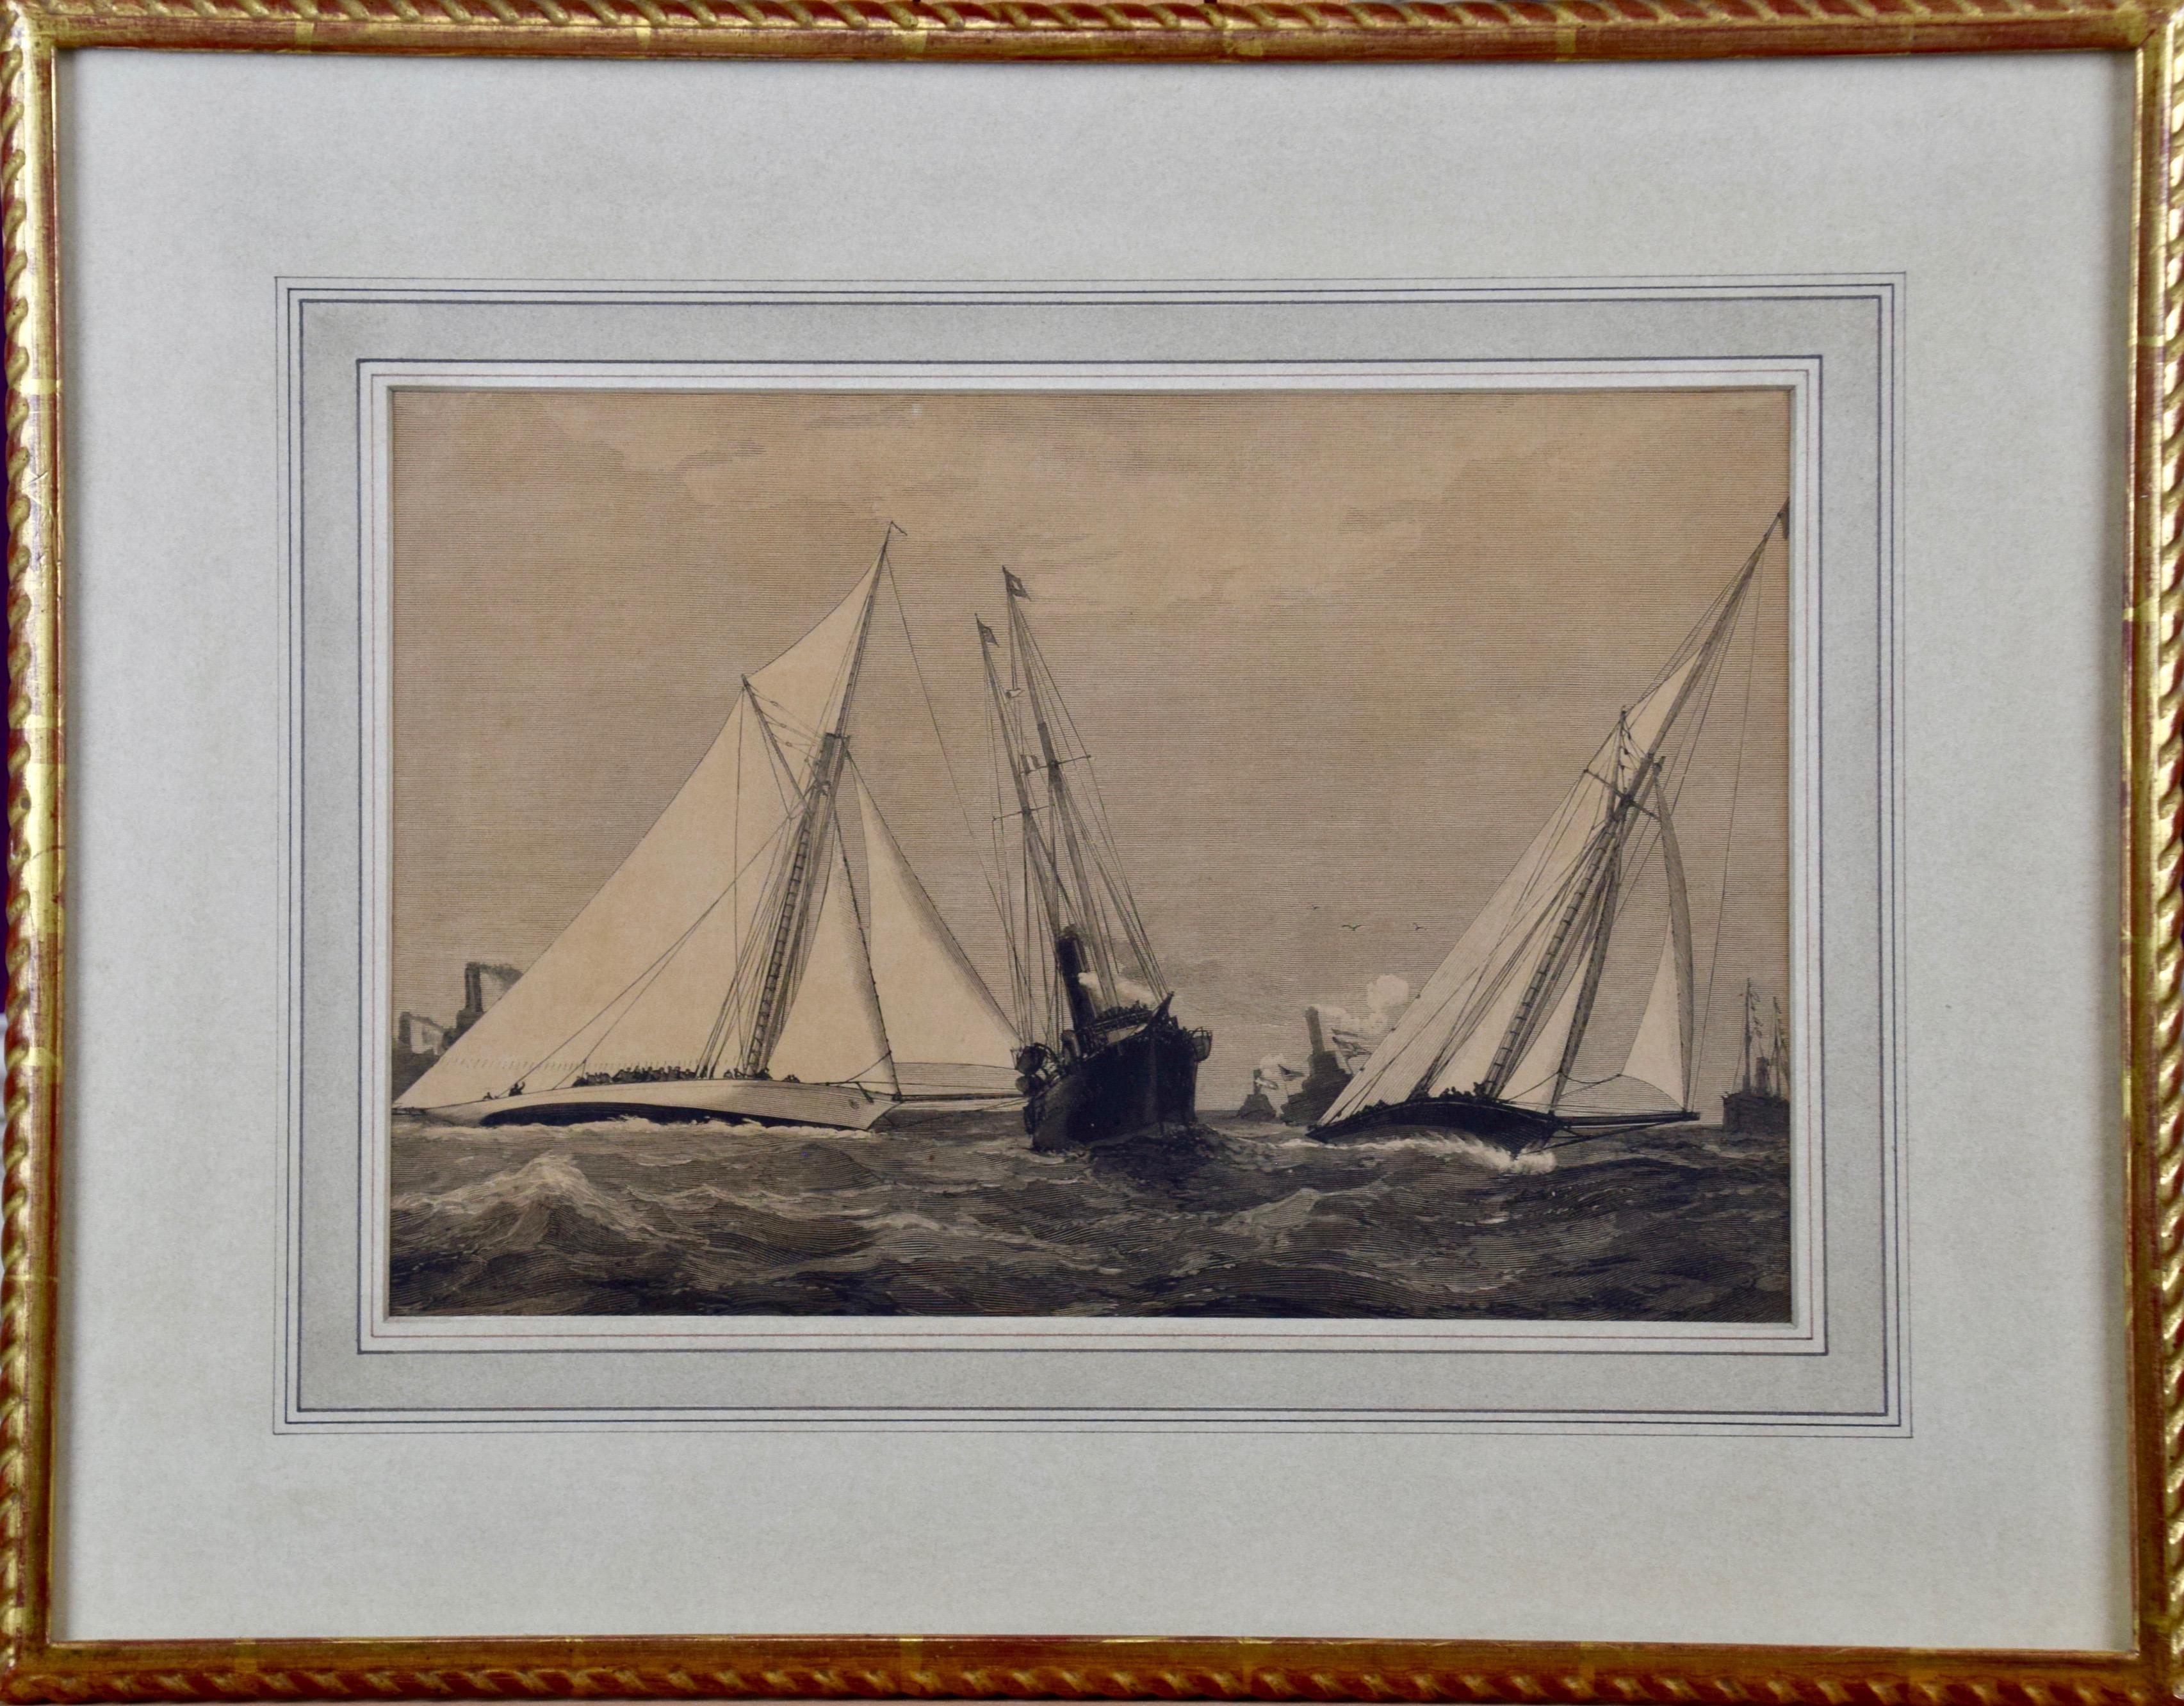 1885 America's Cup Sailing Yachts: Set of 3 Original 19th C. Engravings For Sale 1